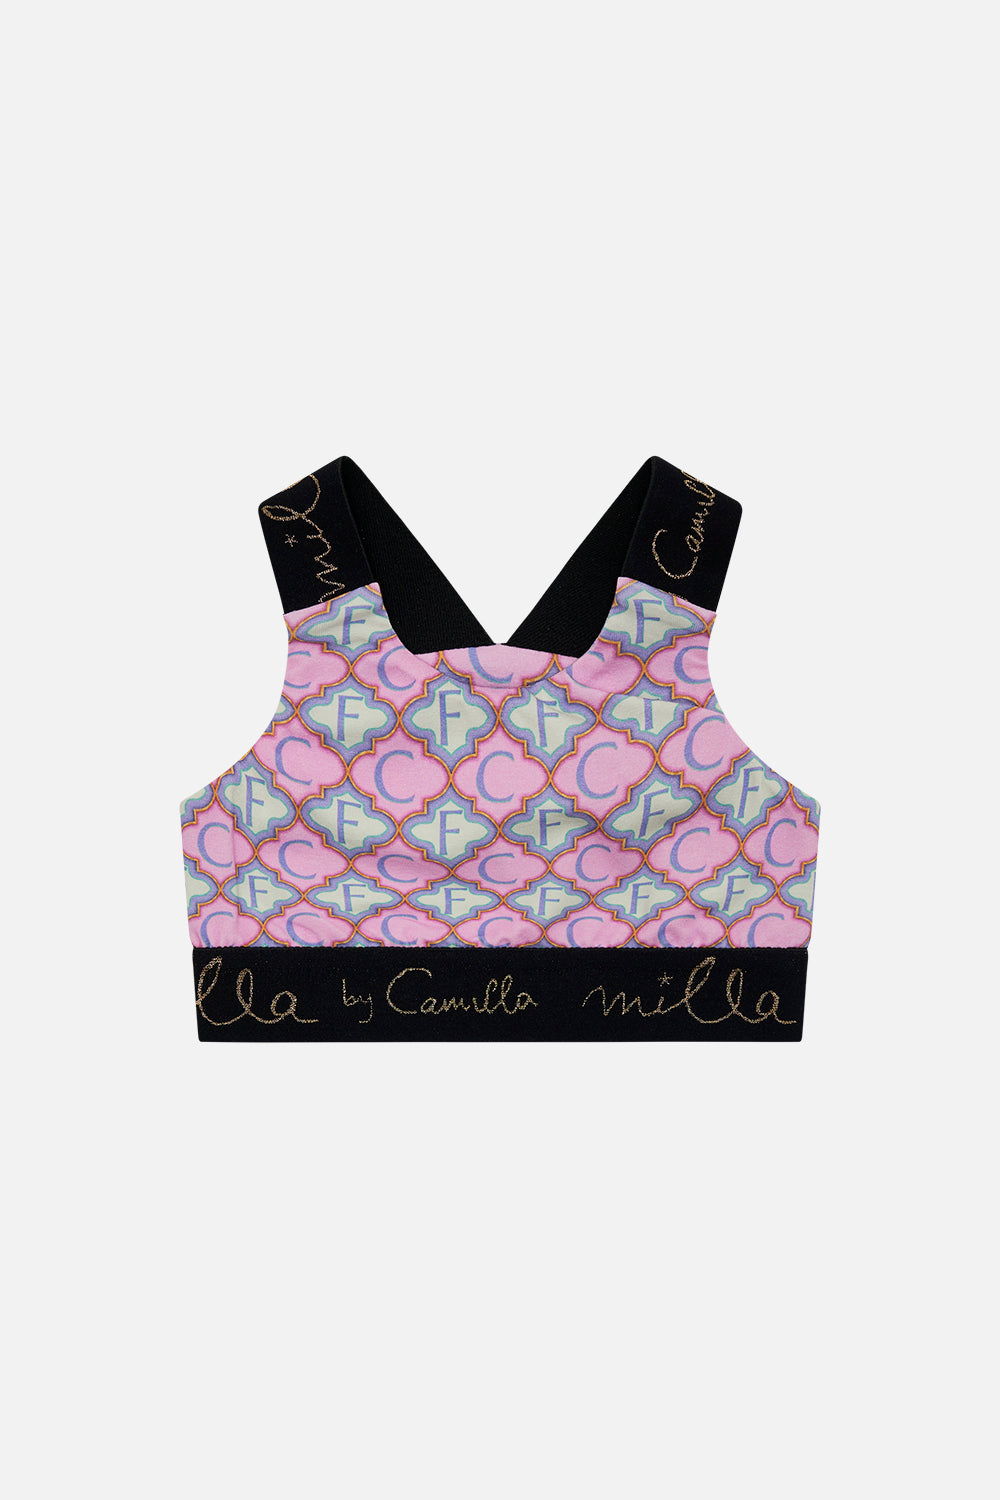 Product view of MILLA By CAMILLA kids sports crop top in Tiptoe The Tightrope print